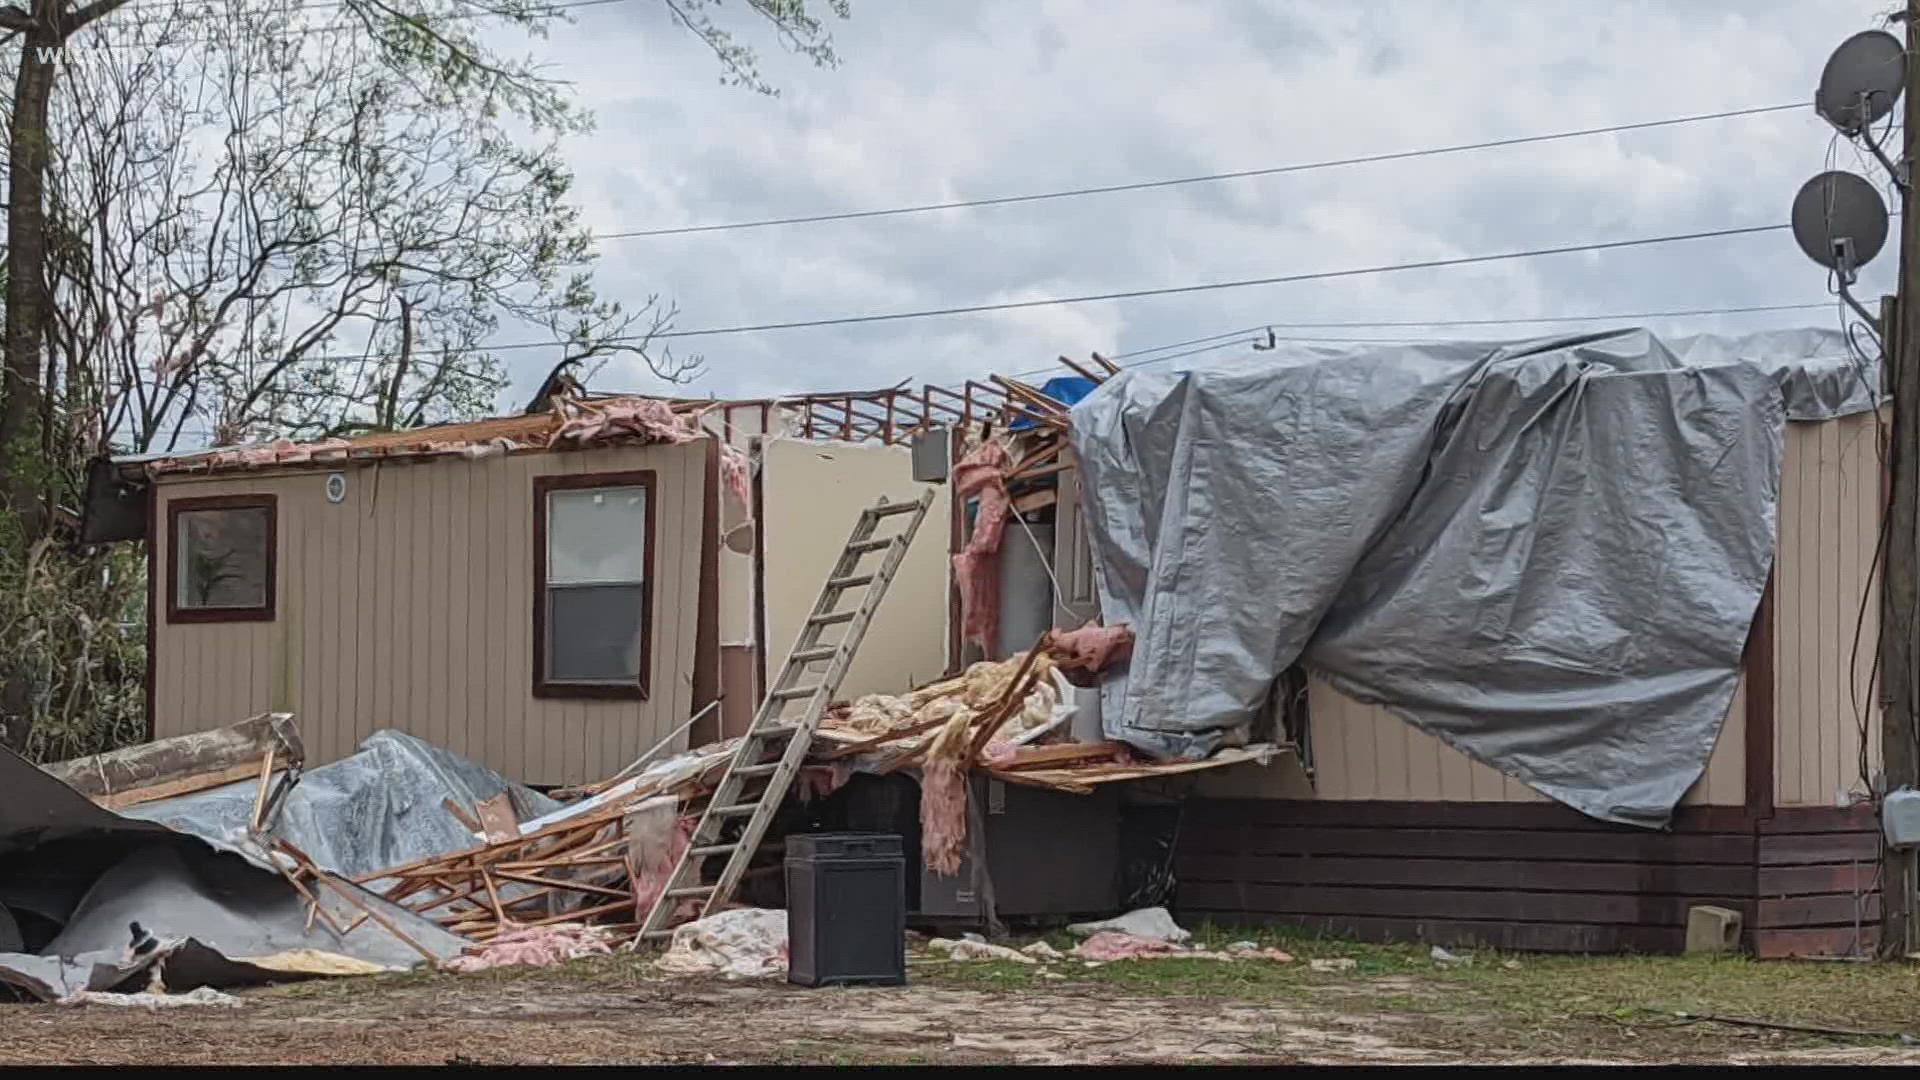 Two days after a storm spun up tornadoes across South Carolina, state and local agencies are beginning to get an idea about how badly each region was hit.